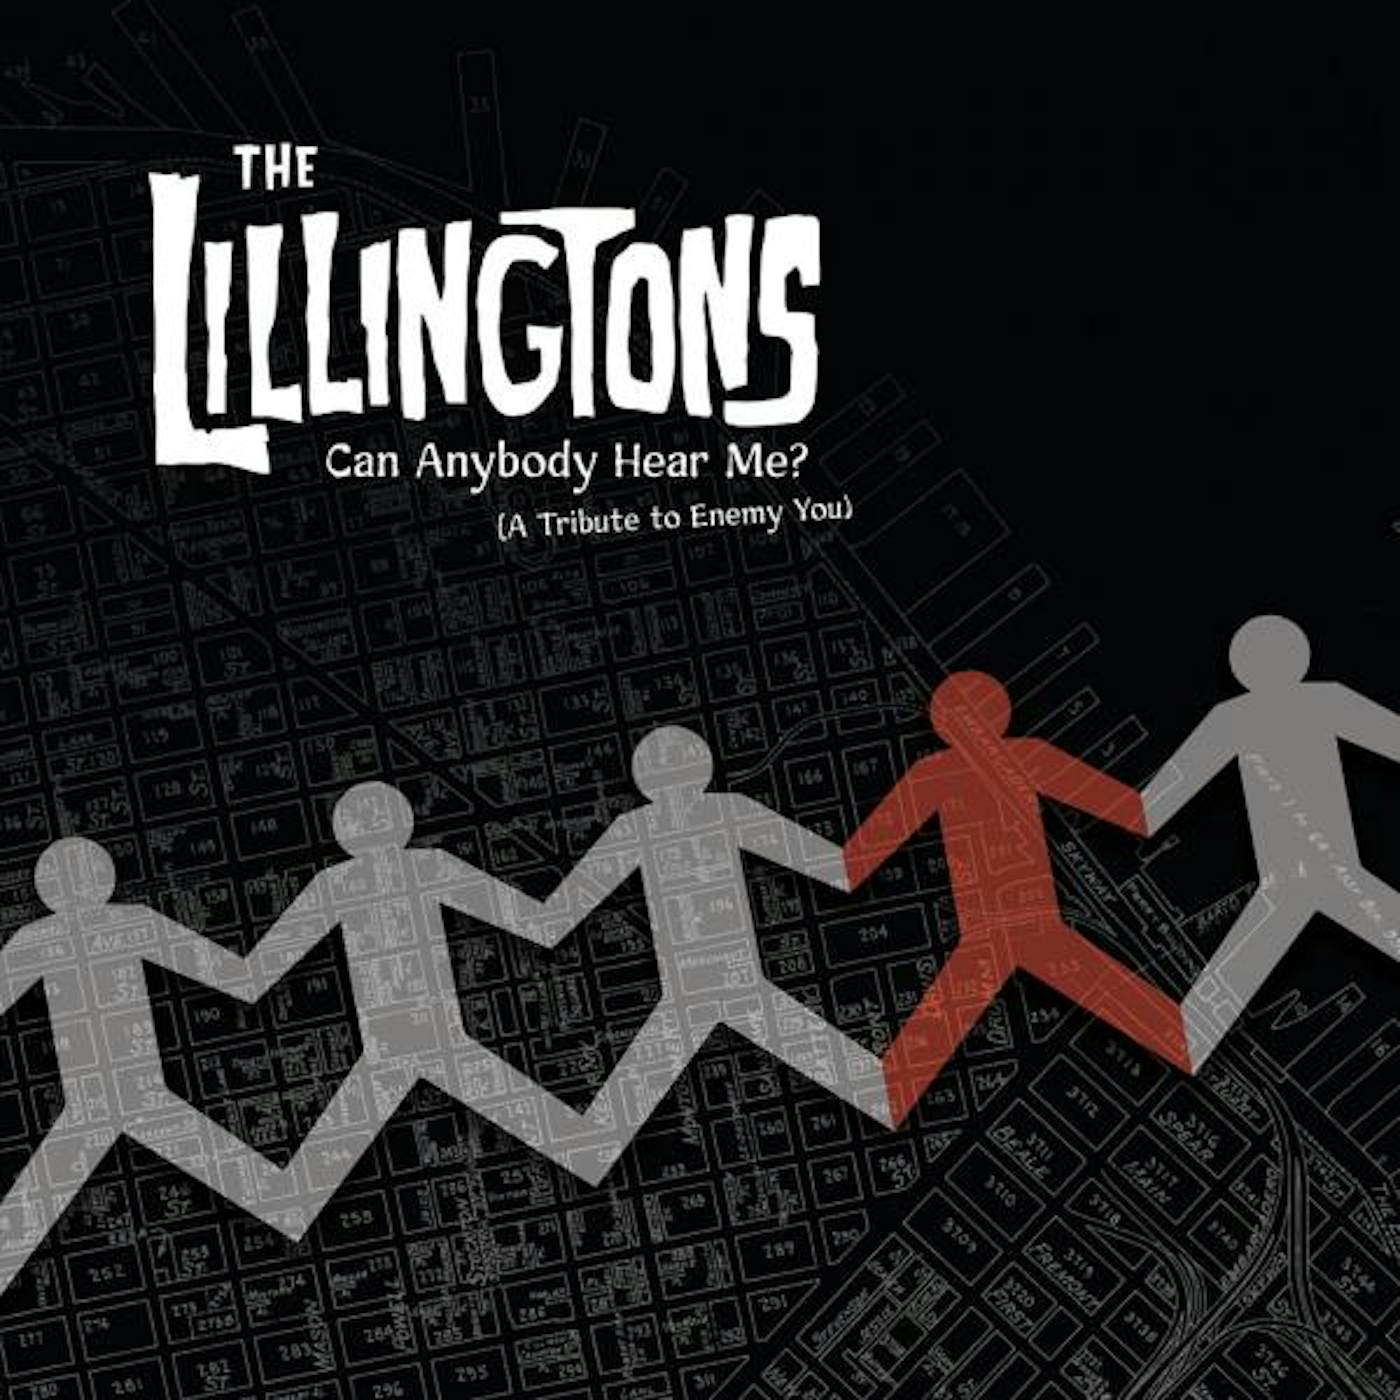 The Lillingtons CAN ANYBODY HEAR ME (A TRIBUTE TO ENEMY YOU) Vinyl Record